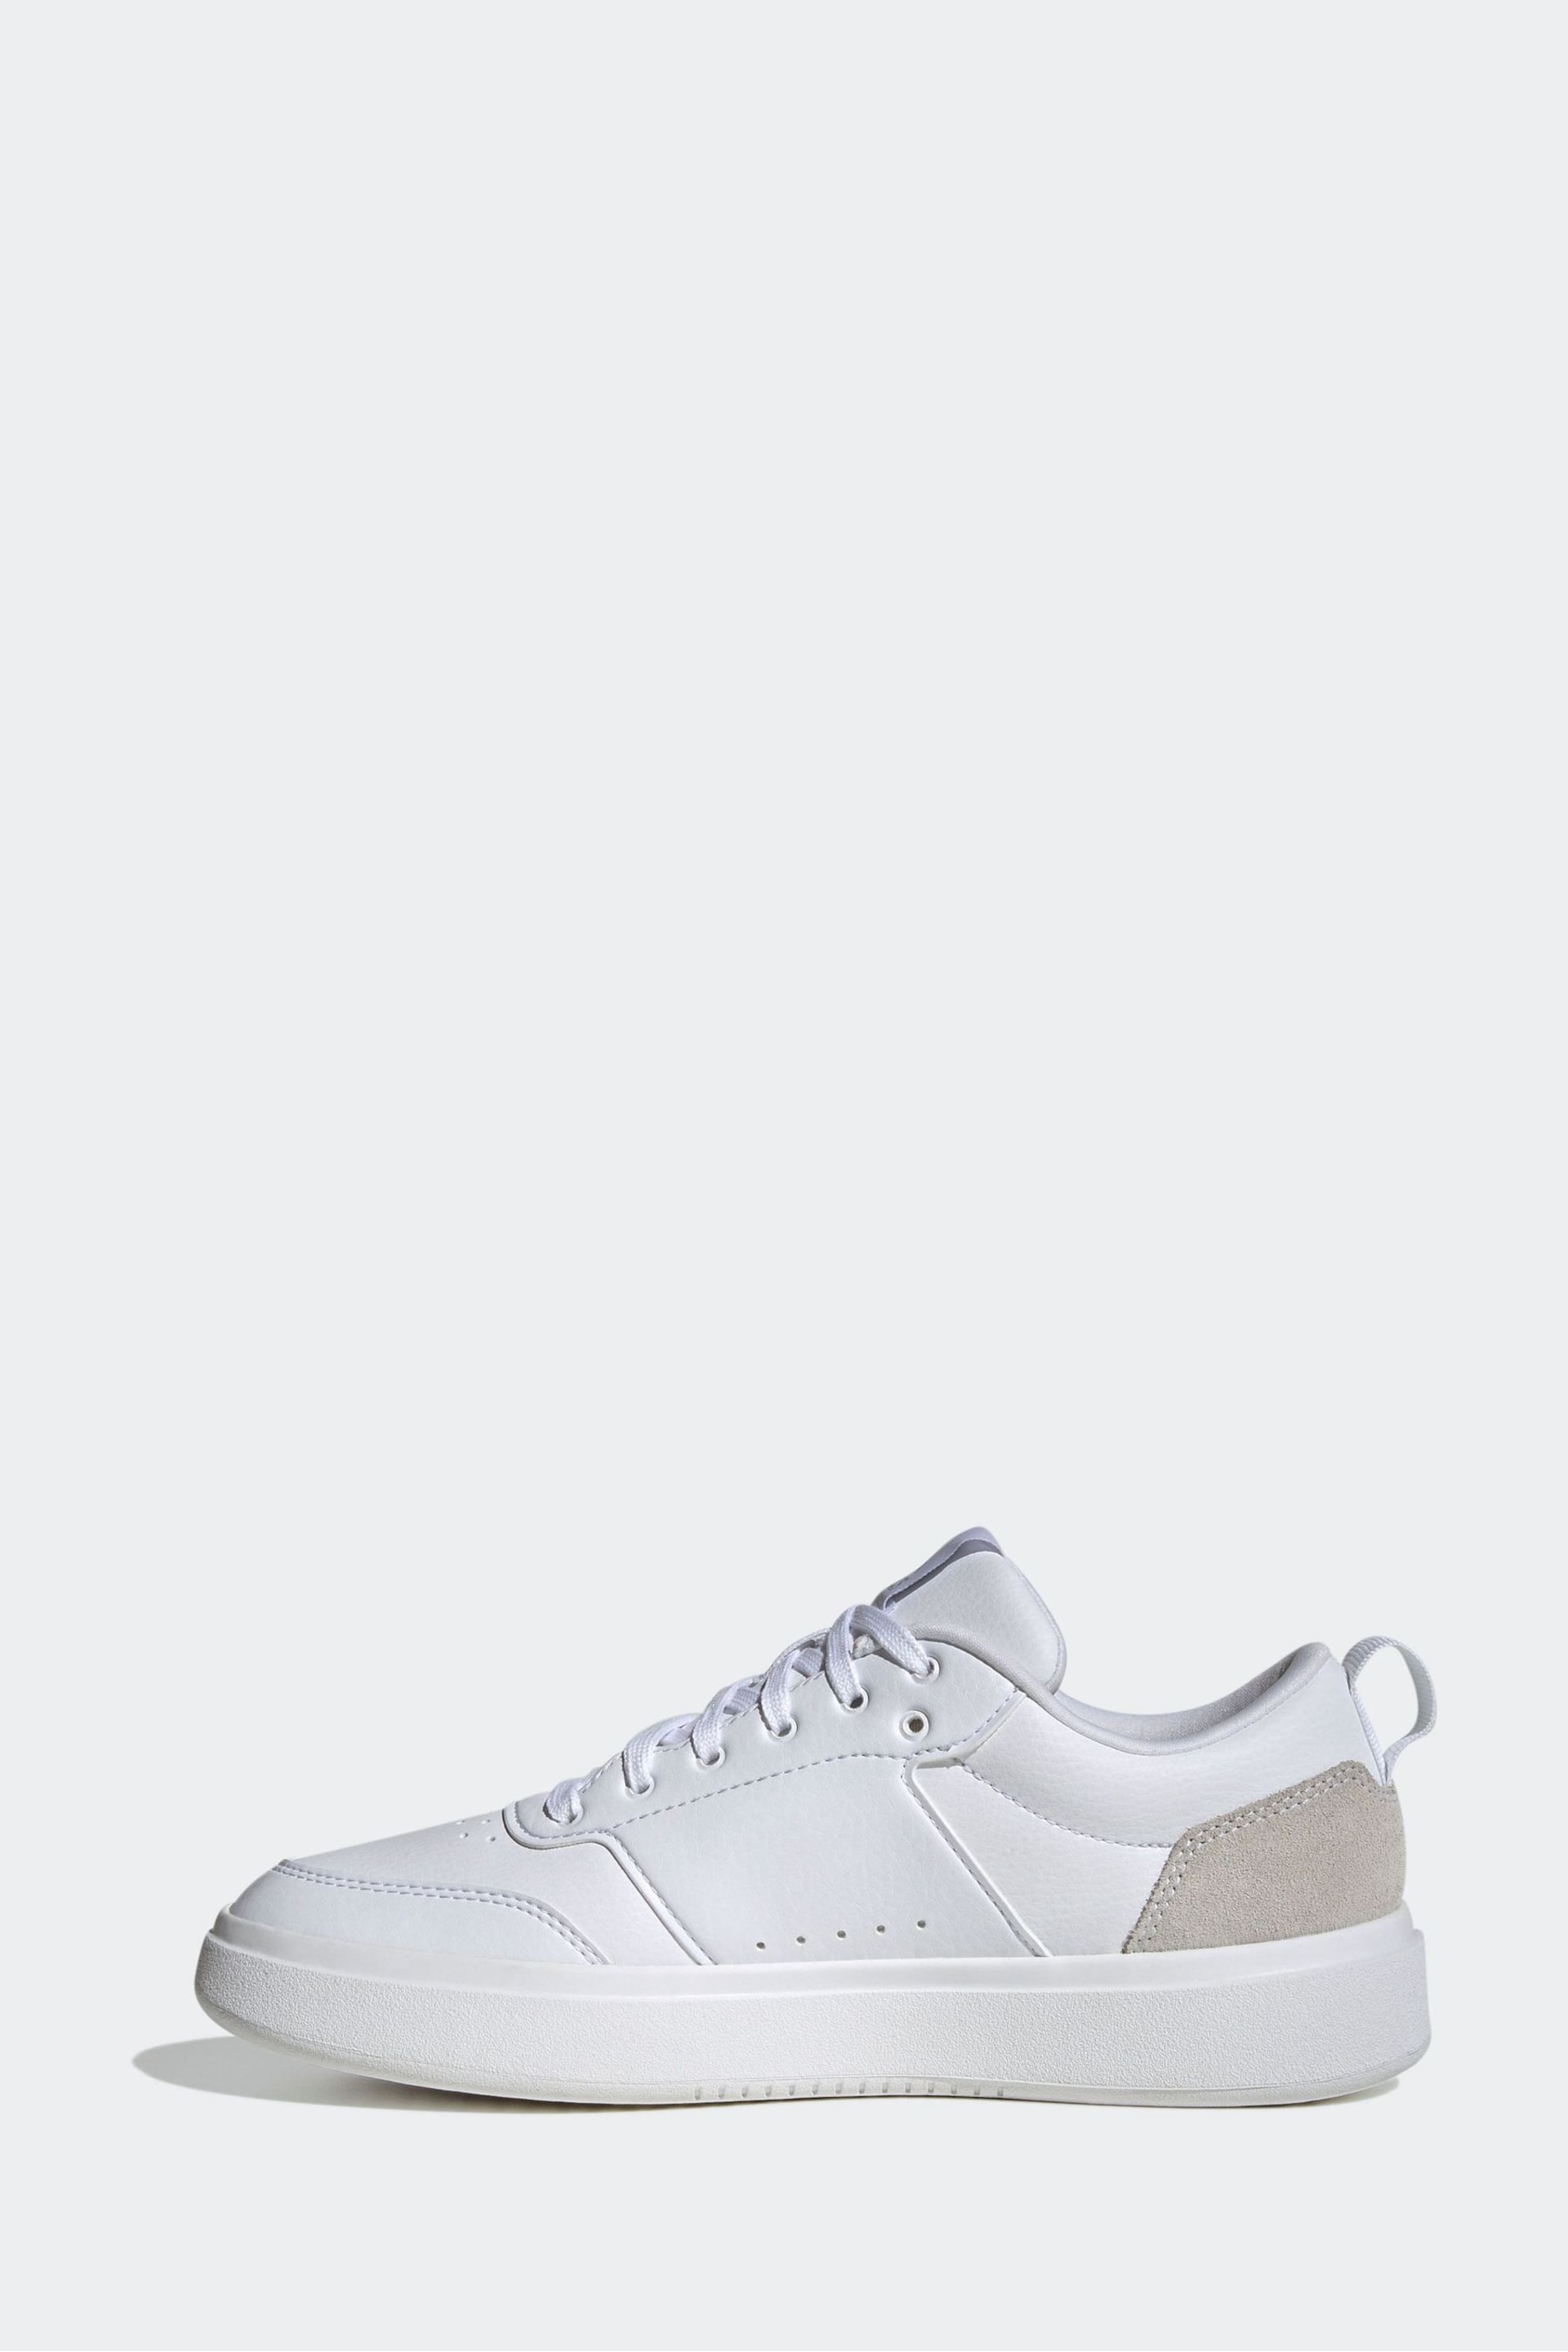 adidas White/Silver Sportswear Park Street Trainers - Image 4 of 9